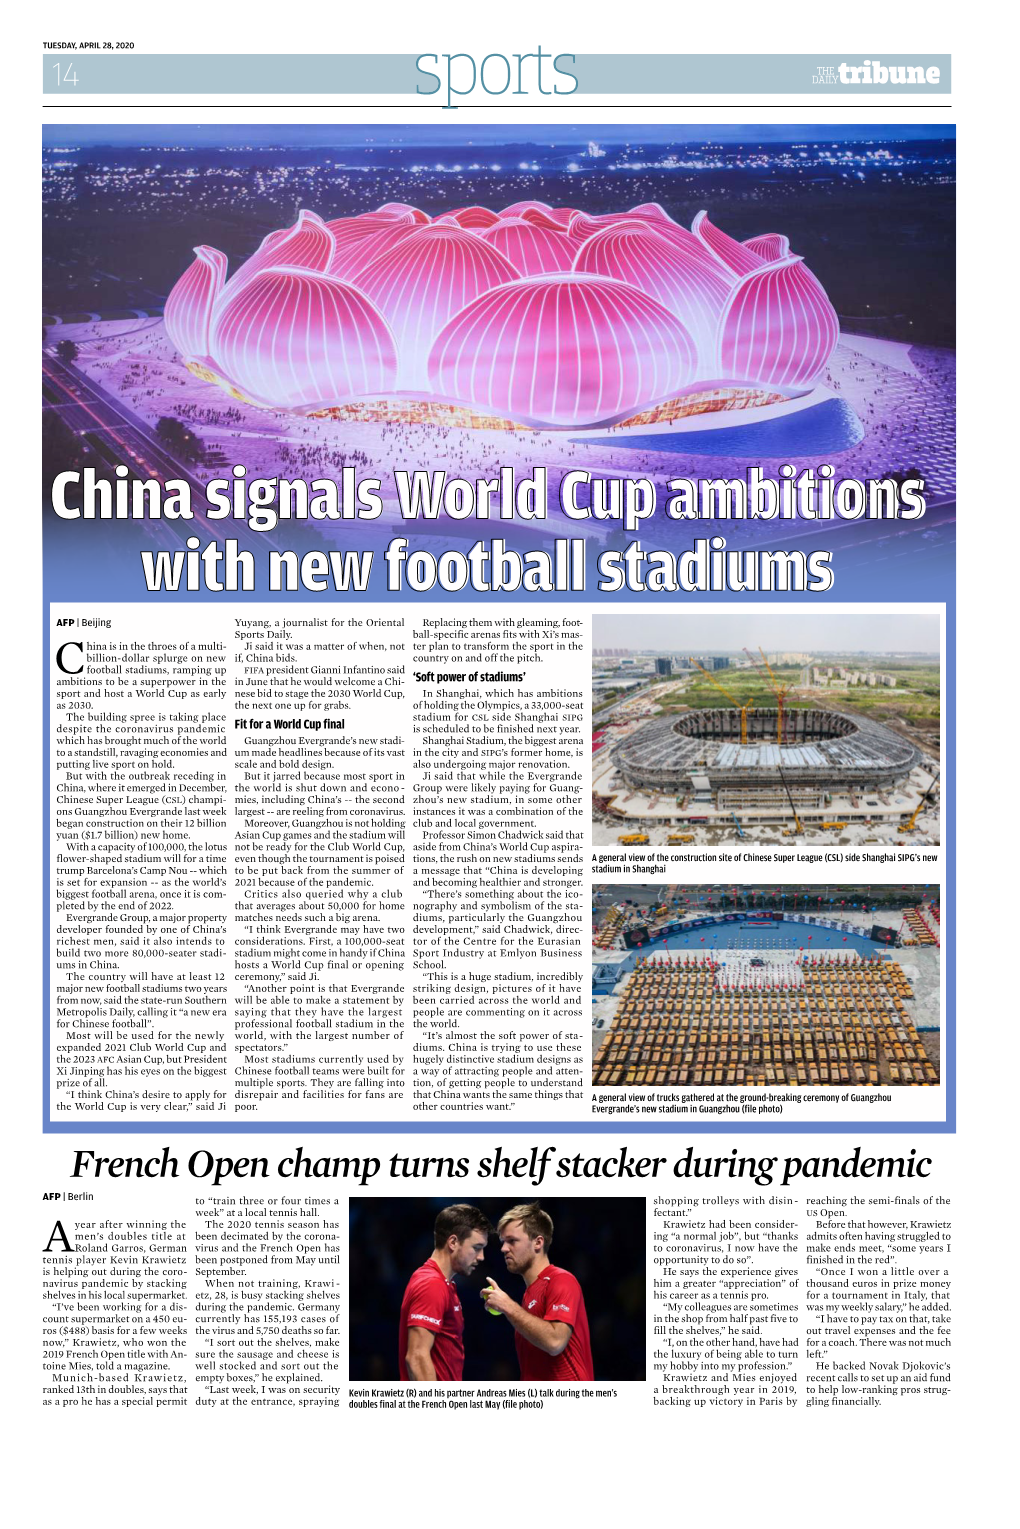 China Signals World Cup Ambitions with New Football Stadiums AFP | Beijing Yuyang, a Journalist for the Oriental Replacing Them with Gleaming, Foot- Sports Daily